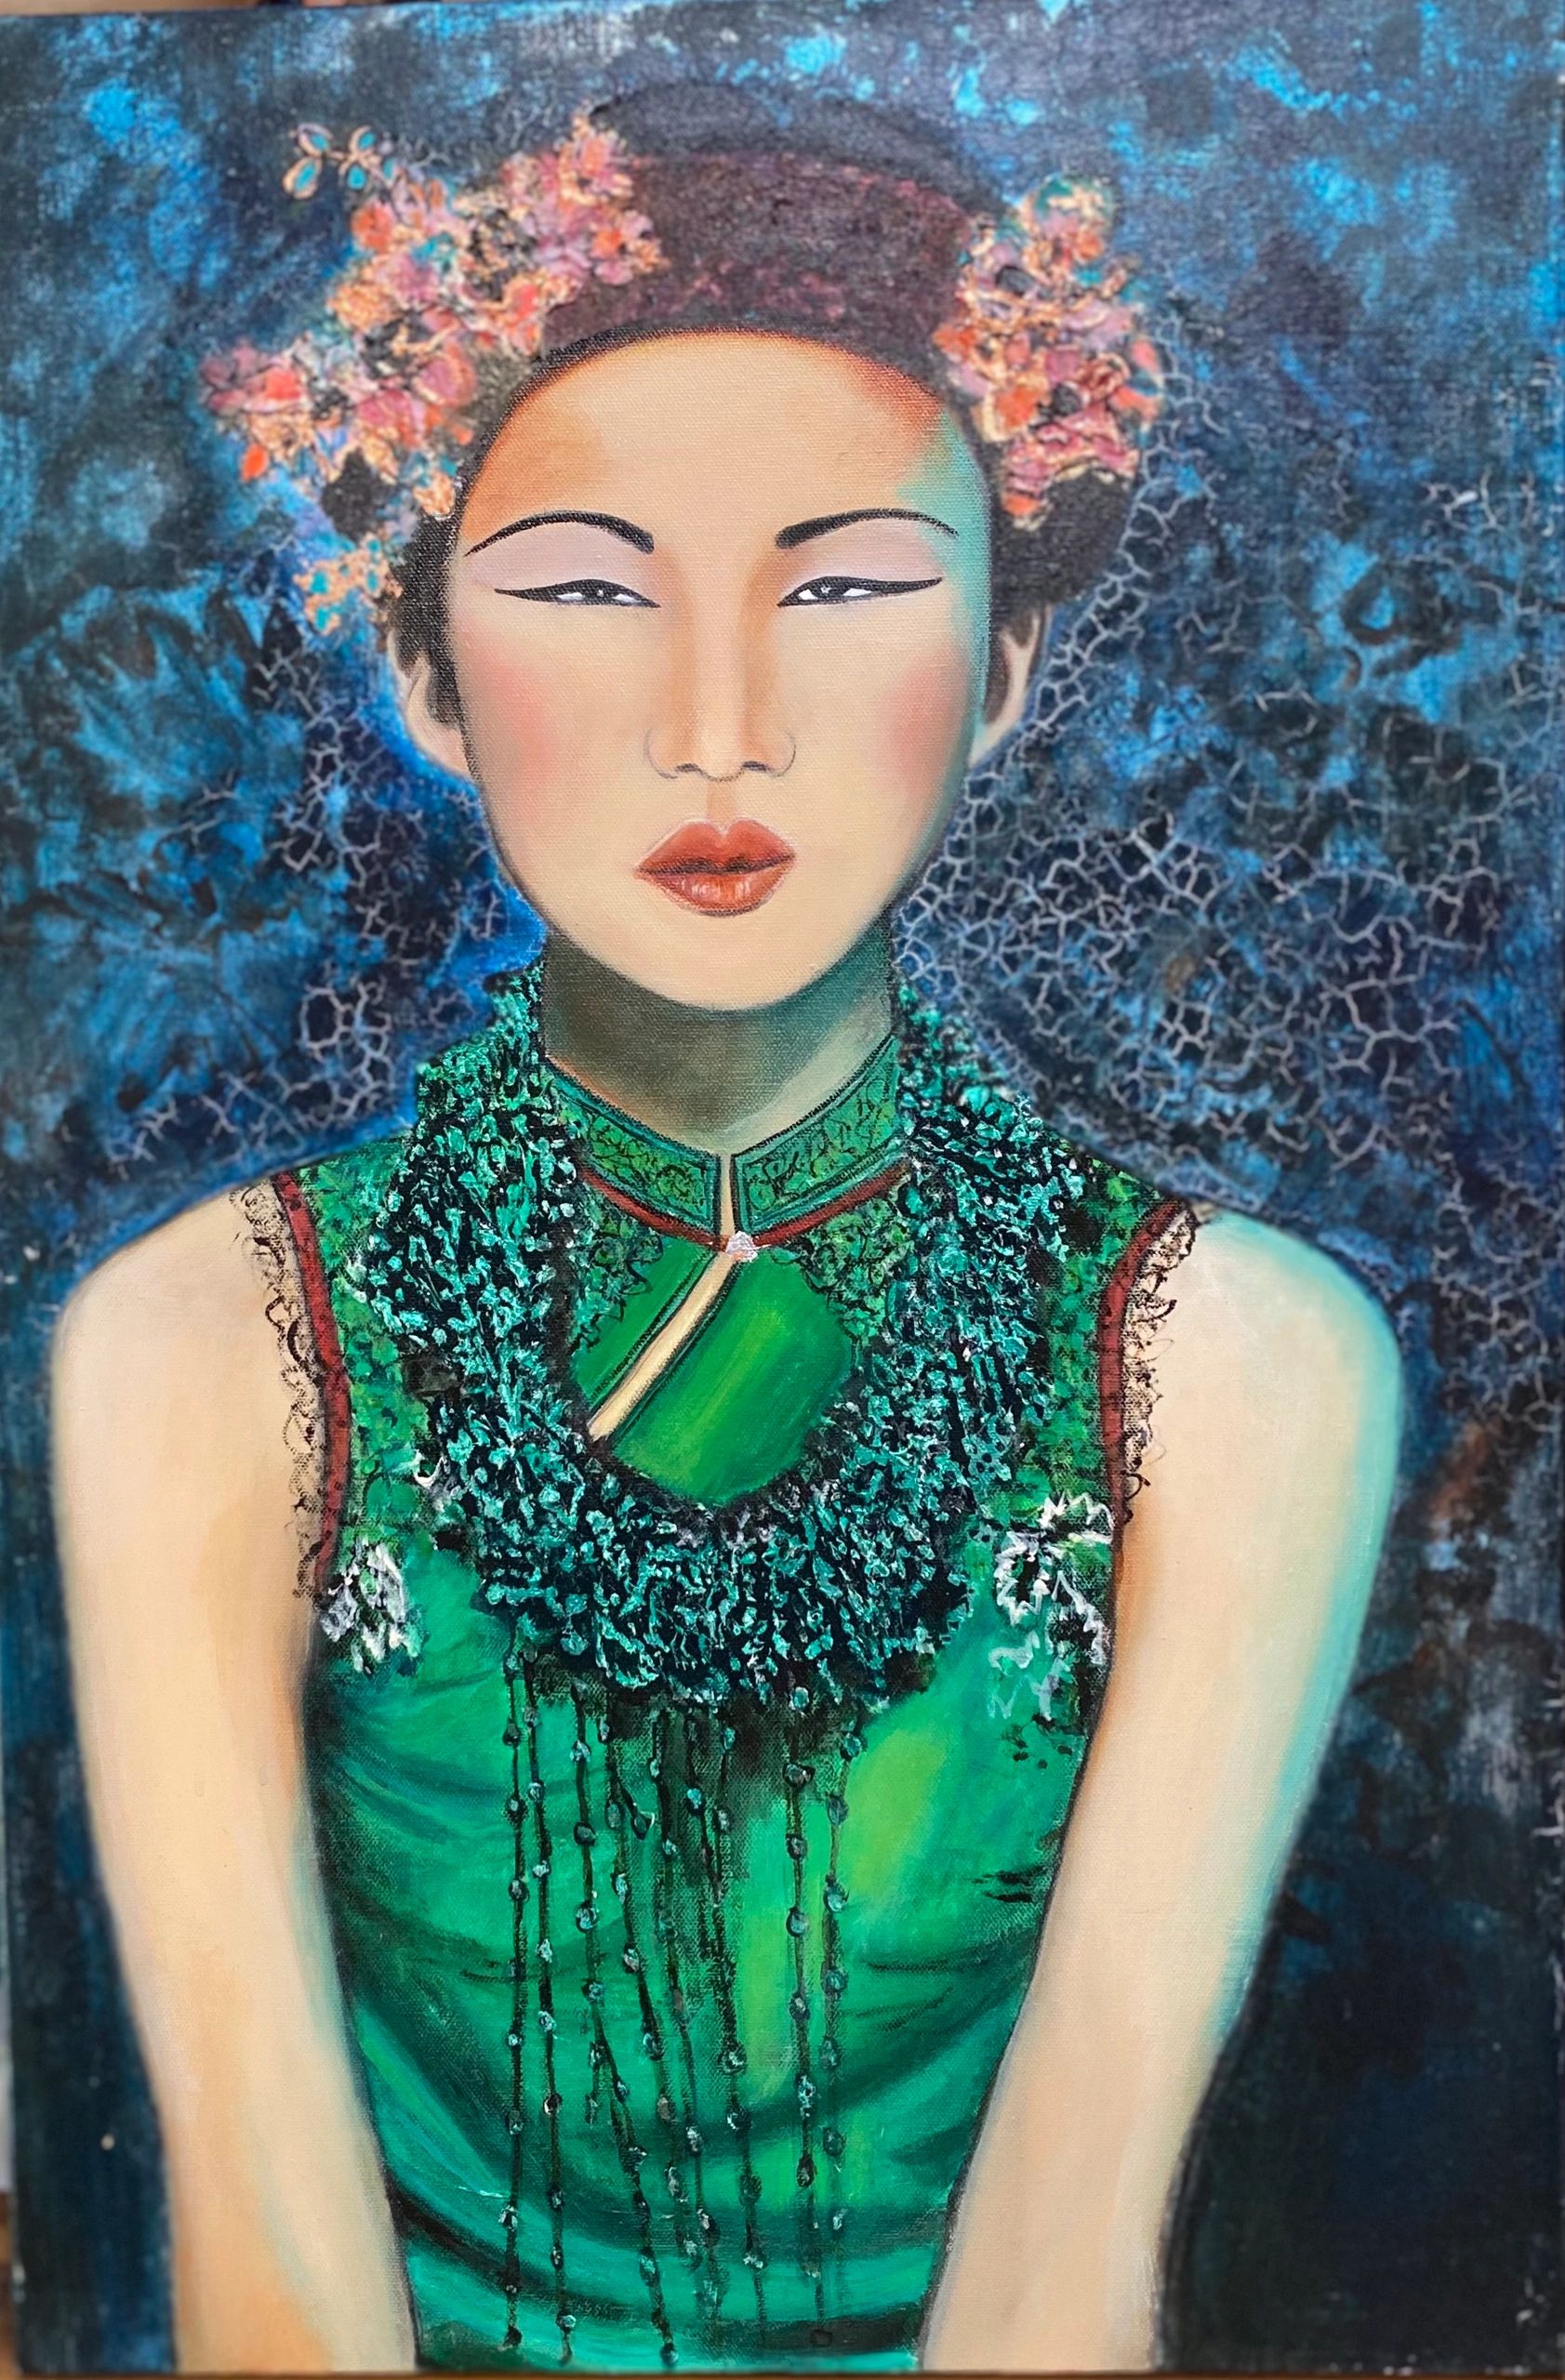 PAINTING OF A VIETNAMESE FEMALE WITH A GREEN TOP.